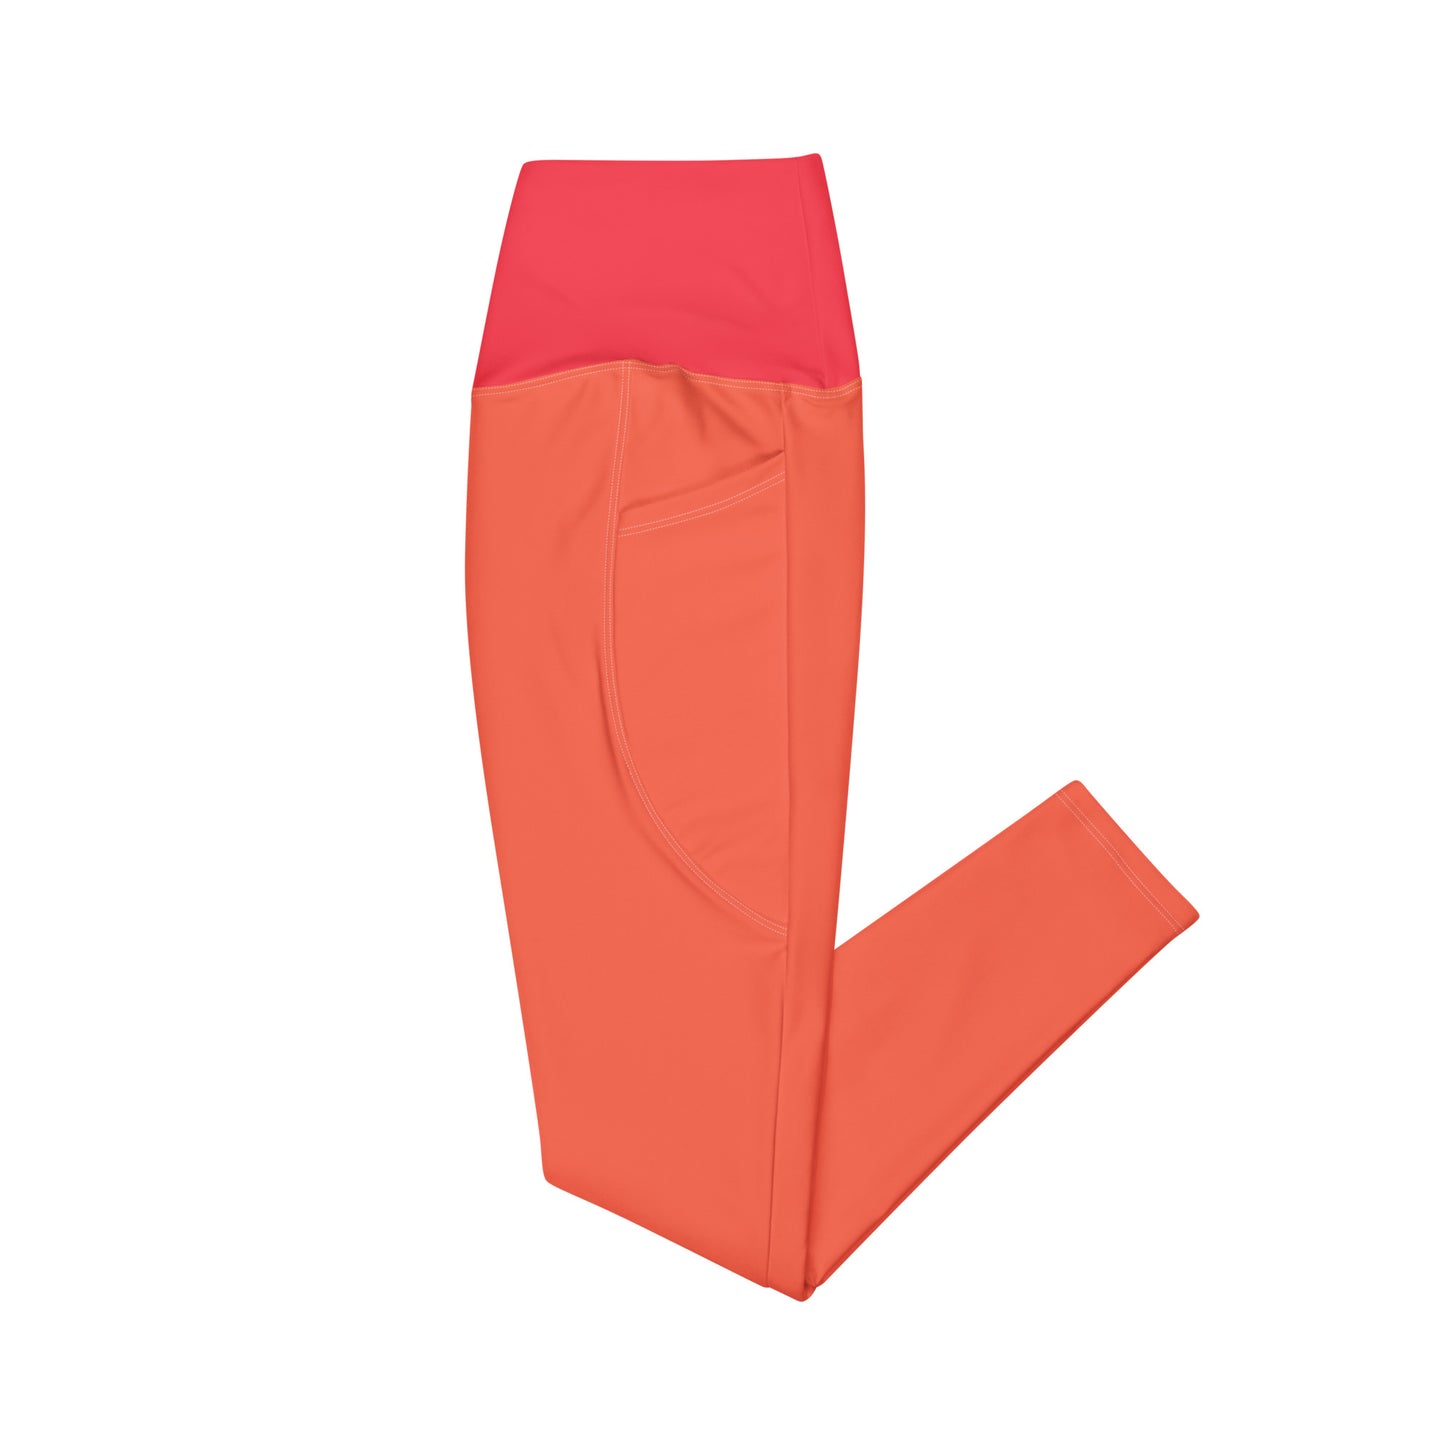 Cotswolds Colorblock High Waist 7/8 Recycled Yoga Leggings / Yoga Pants with Pockets